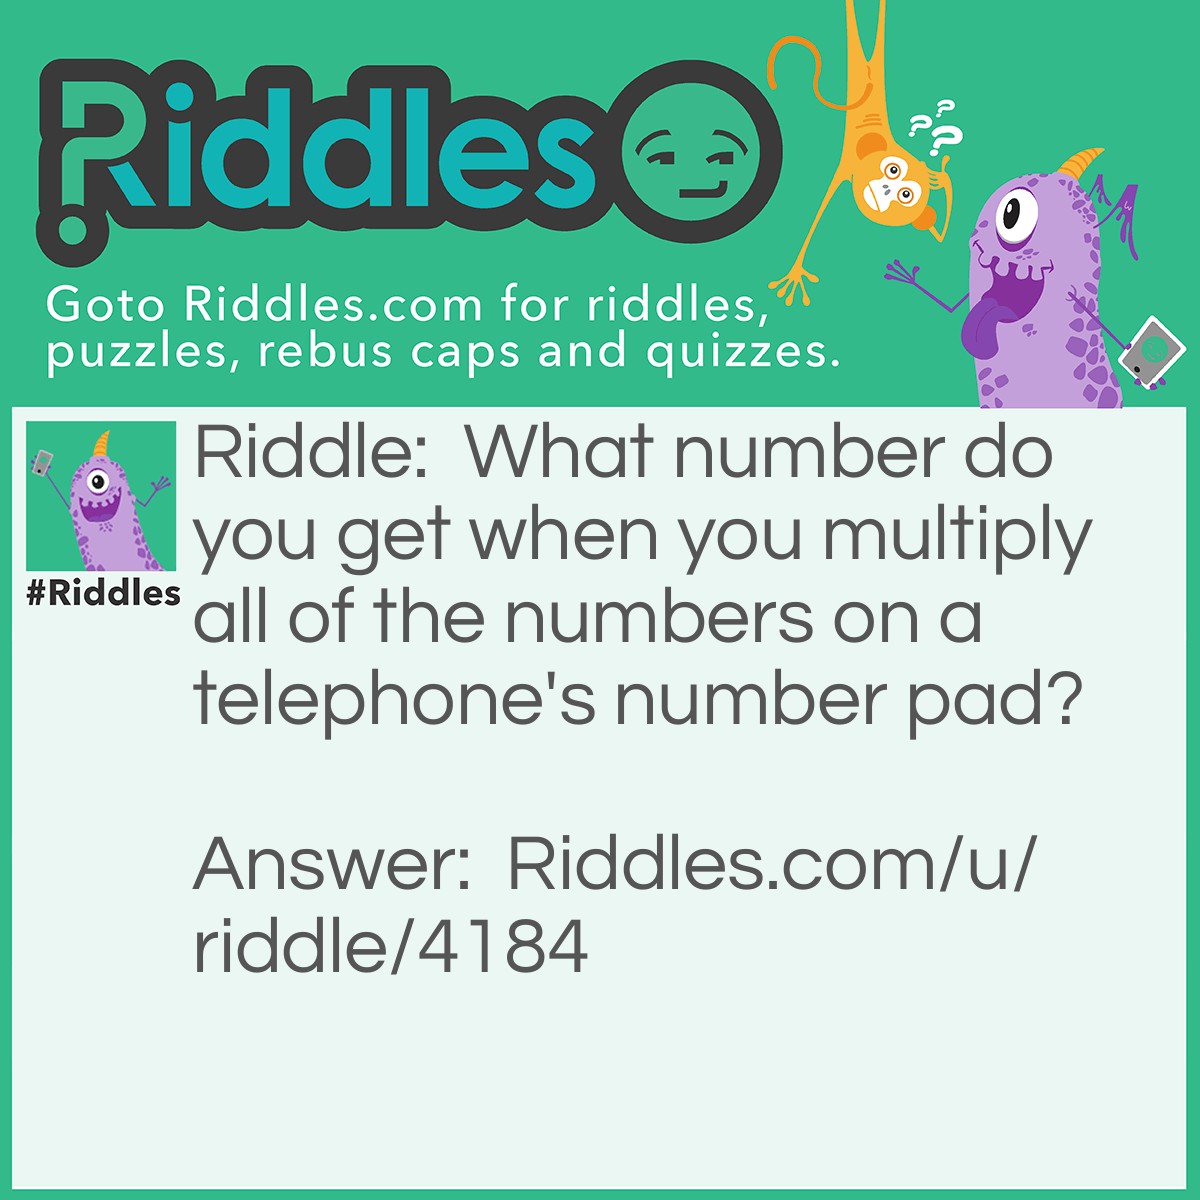 Riddle: What number do you get when you multiply all of the numbers on a telephone's number pad? Answer: Zero. Anything multiplied by zero will equal zero.